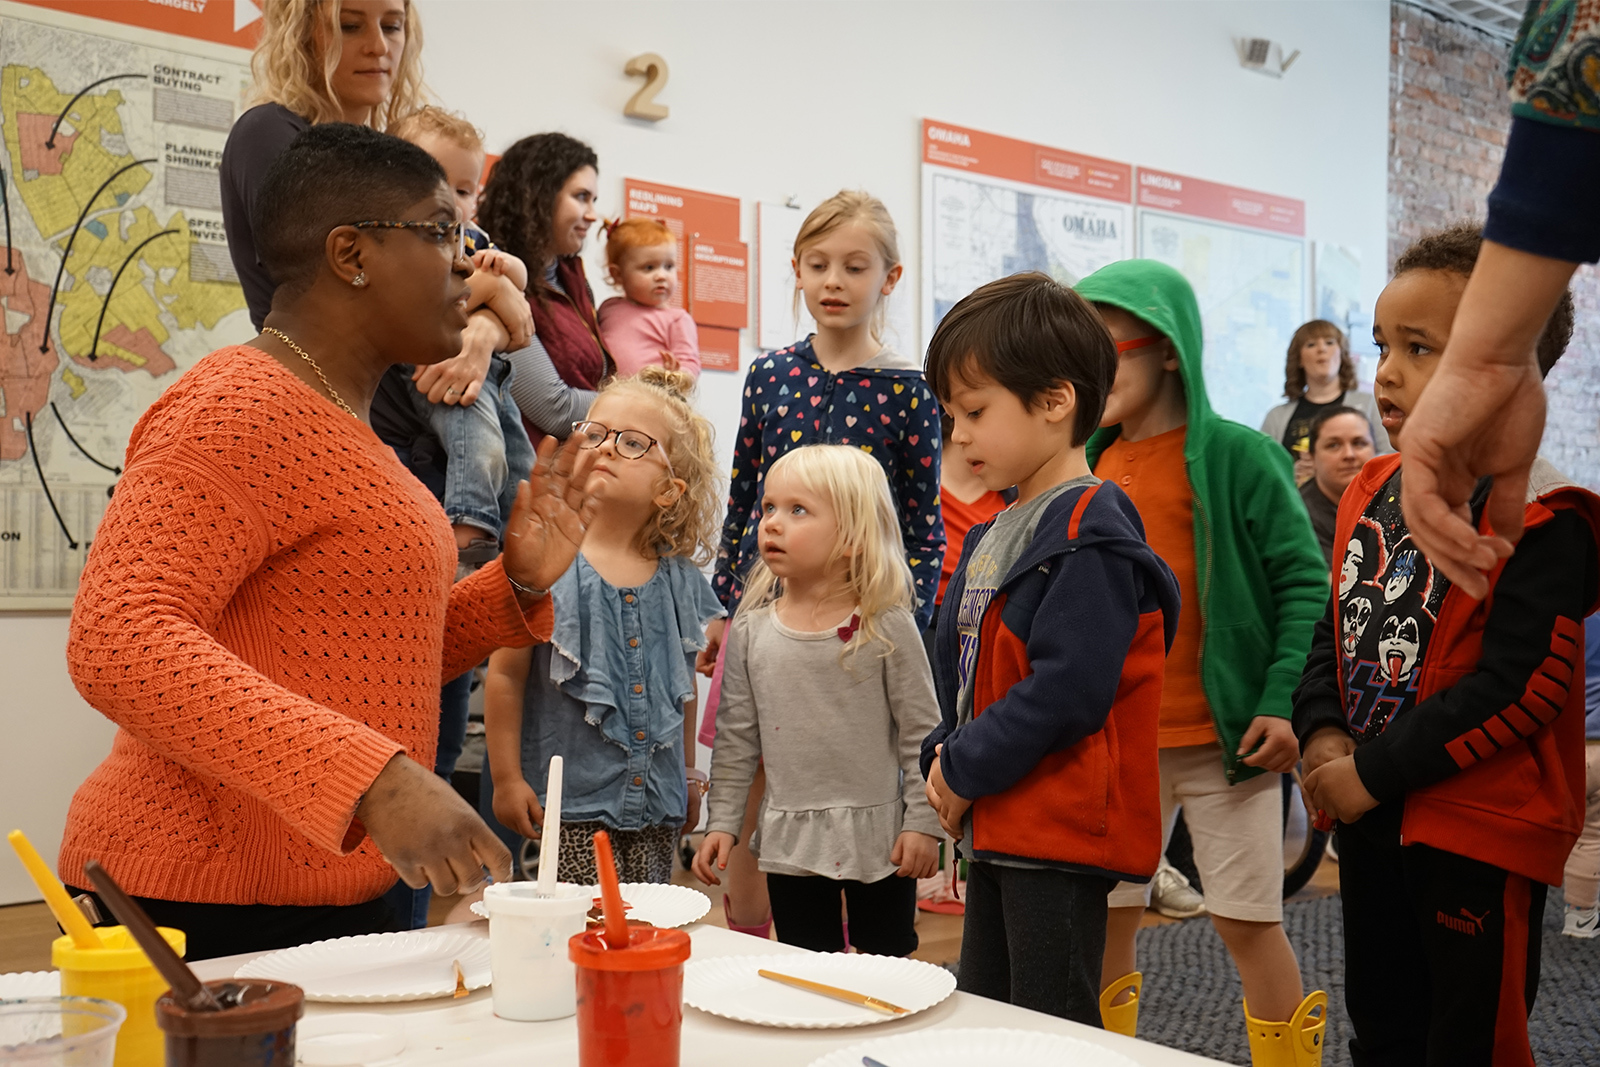 A group of toddlers listens closely to a teaching artist instructing them on finger painting